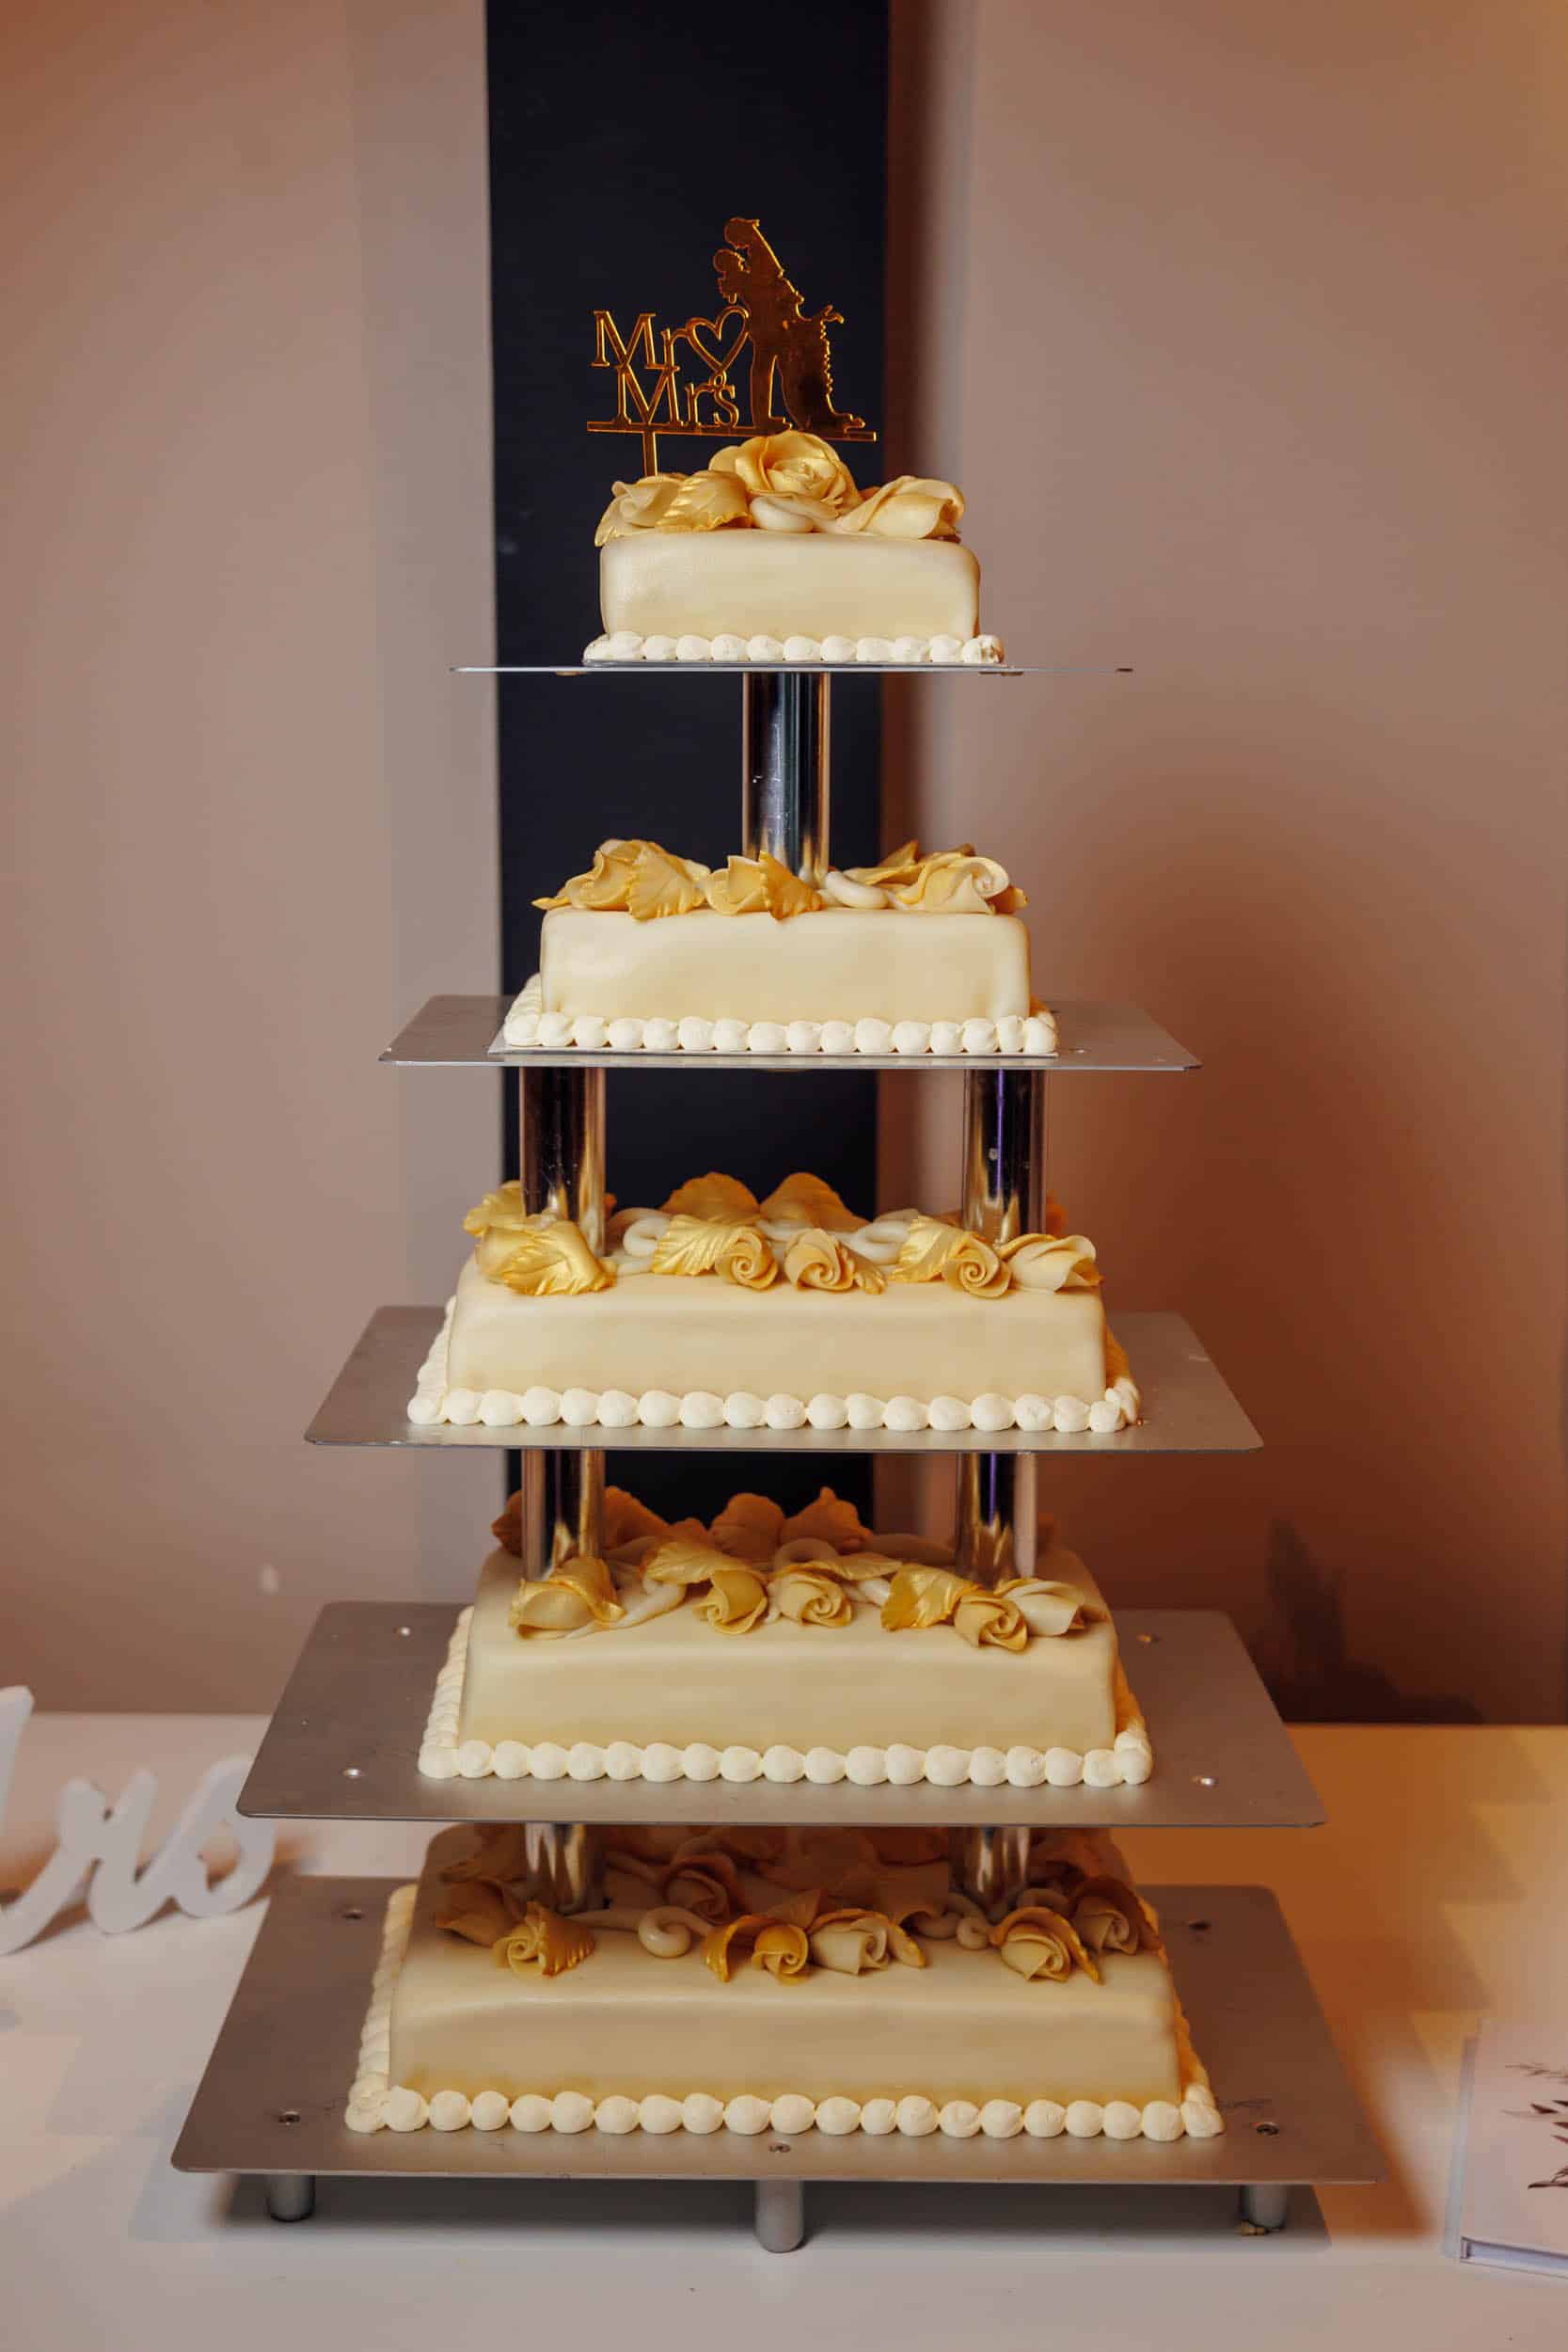 A five-tier wedding cake decorated with gold roses and pearls, displayed on a metal stand with "mr & mrs" sign on the background.